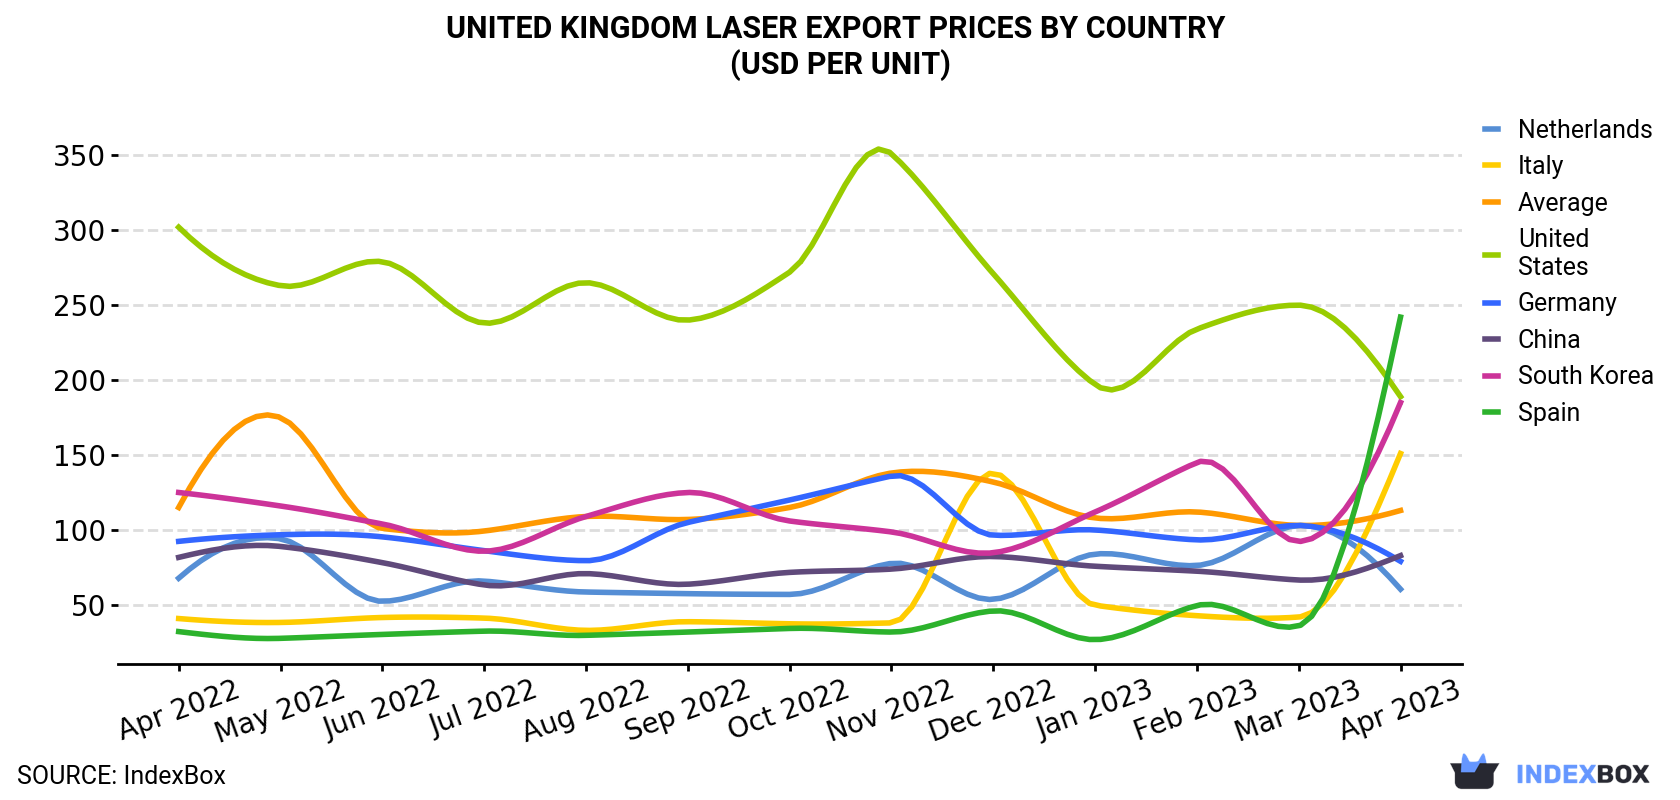 United Kingdom Laser Export Prices By Country (USD Per Unit)